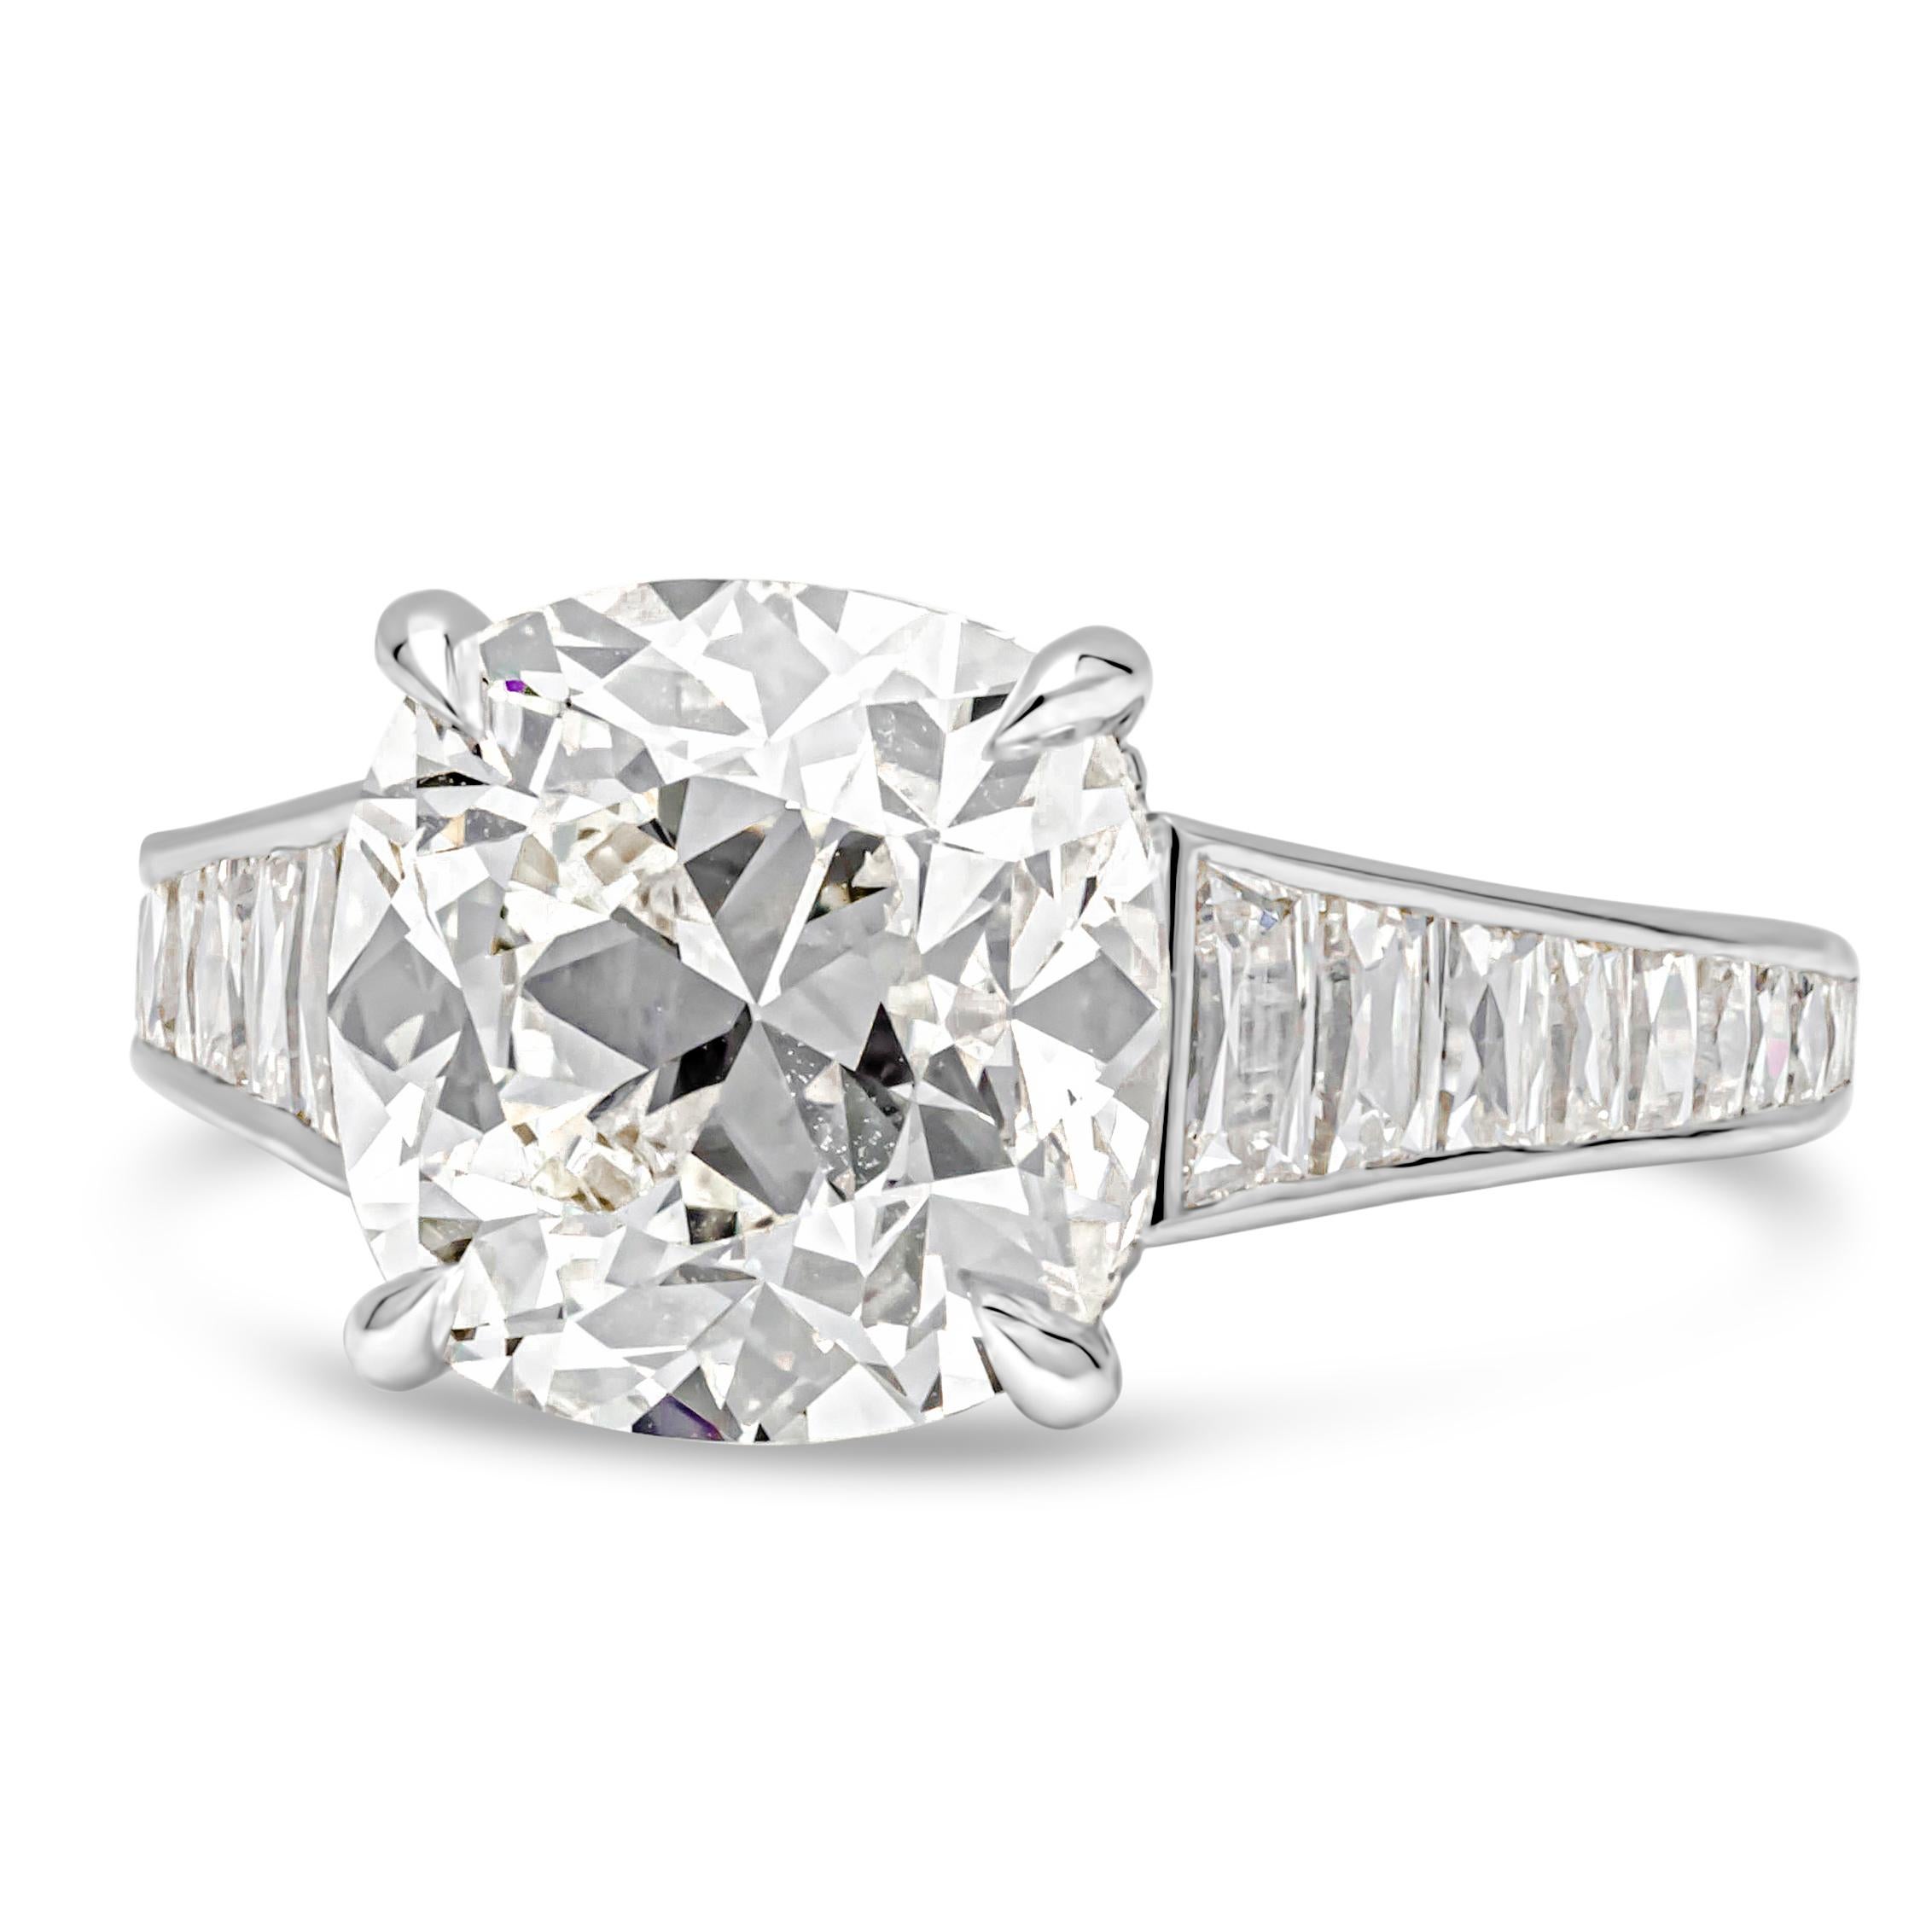 A stunning well-crafted engagement ring featuring a beautiful 5.42 carats cushion cut diamond that GIA certified as J color, VS1 in clarity, set in a classic four prong basket setting. Flanking the center diamond are 1.00 carats of tapered french